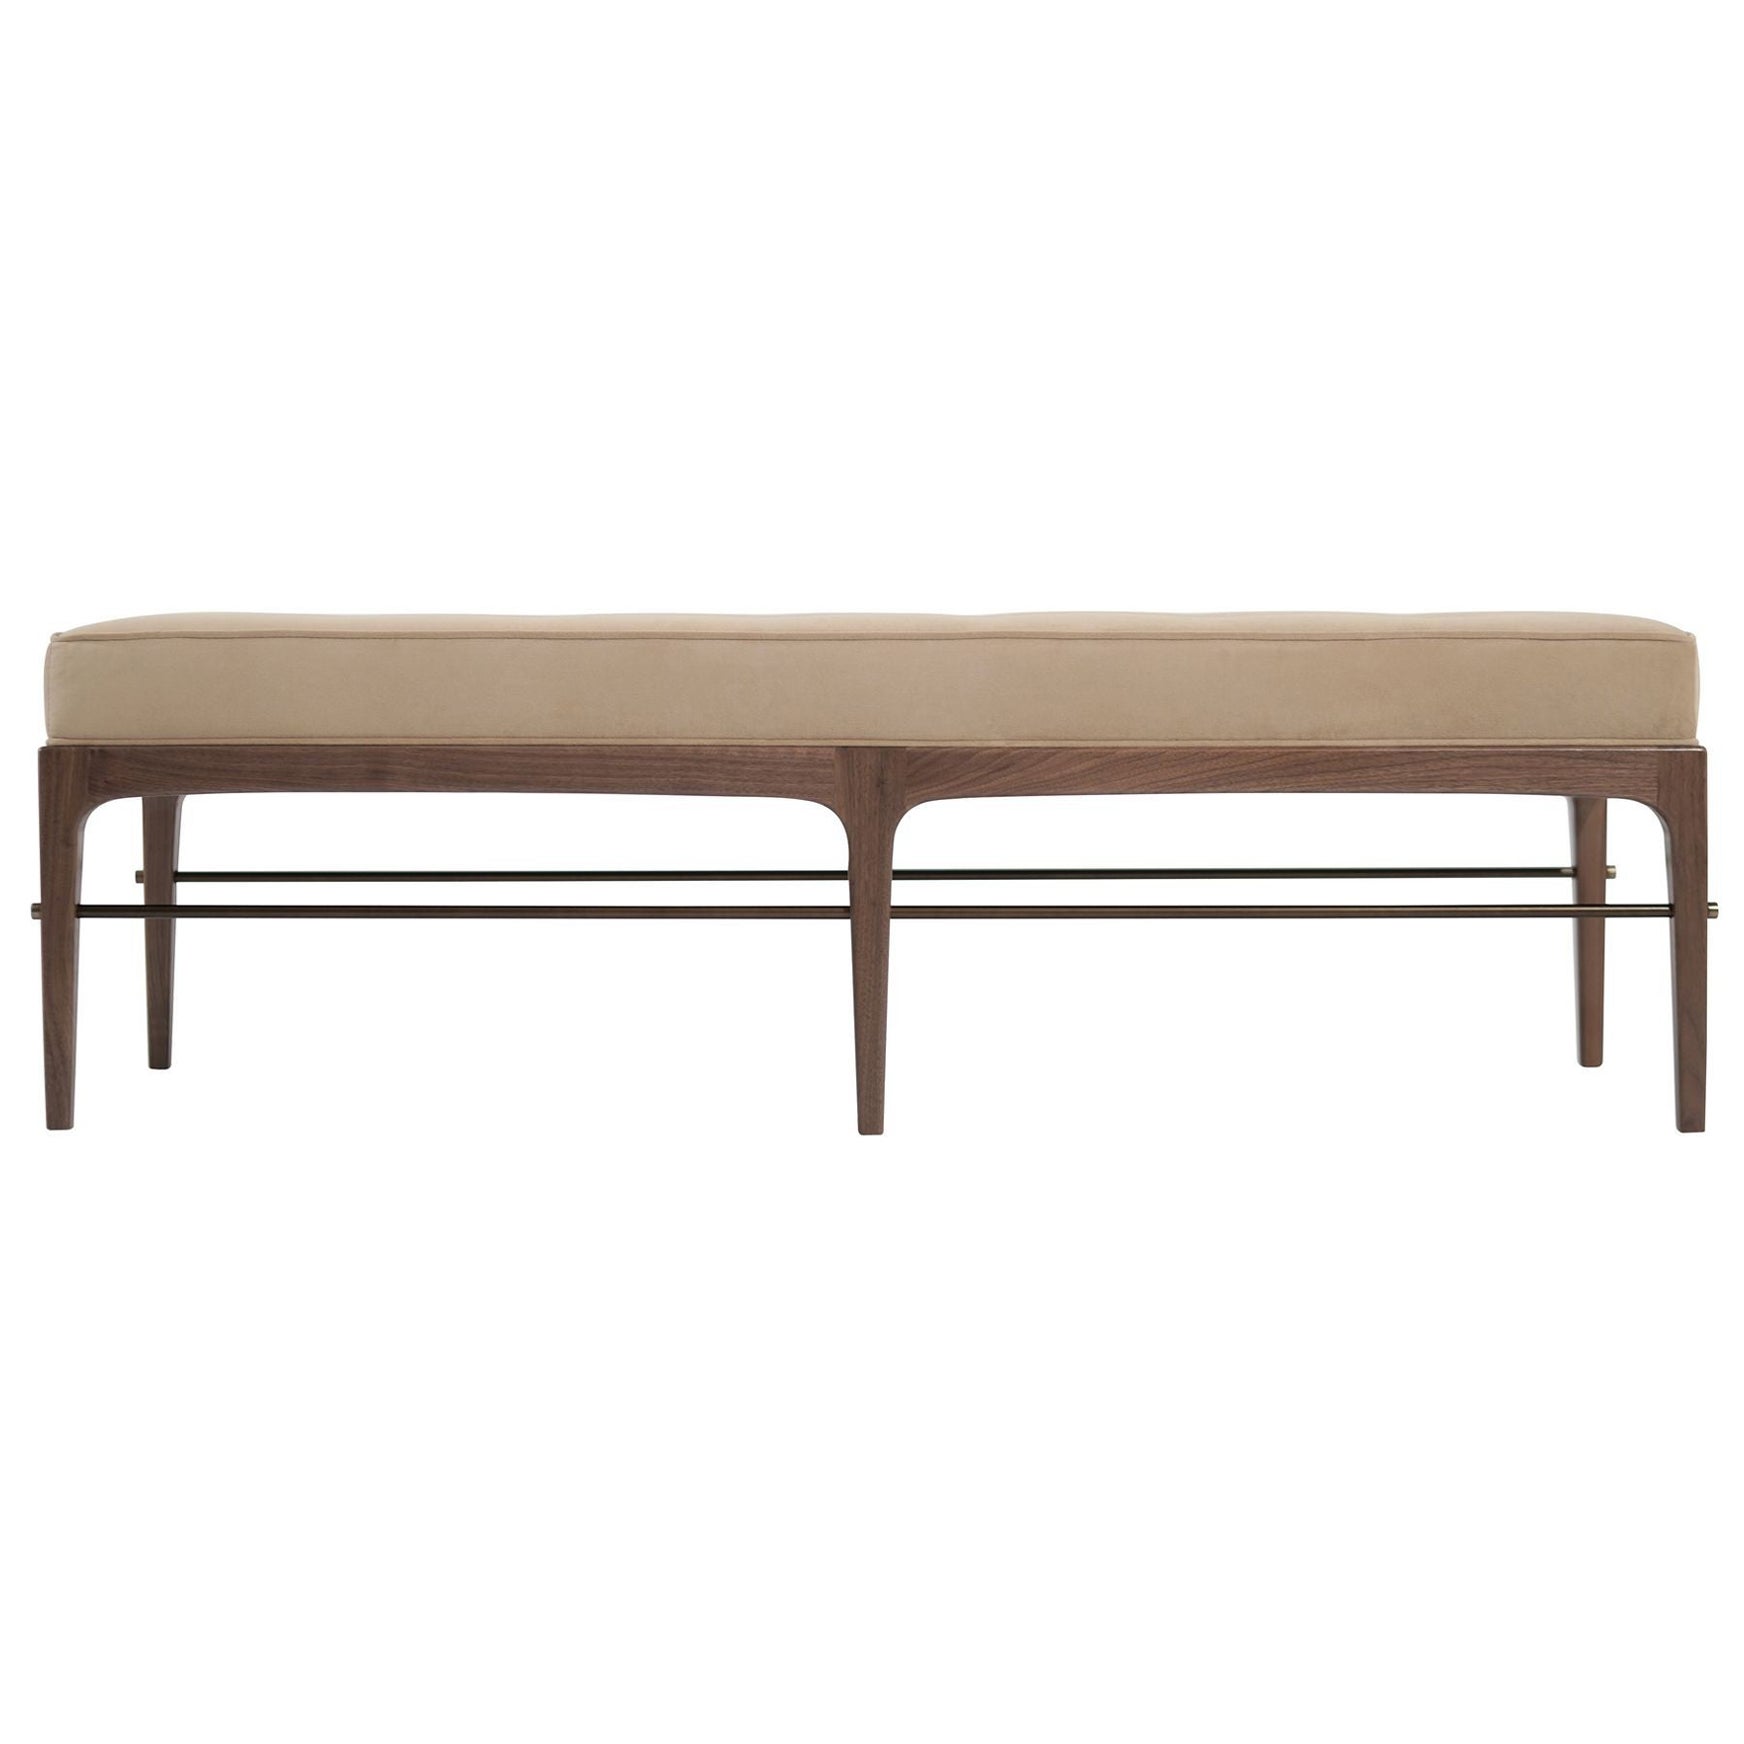 Linear Bench in Natural Wanut Series 60 by Stamford Modern For Sale